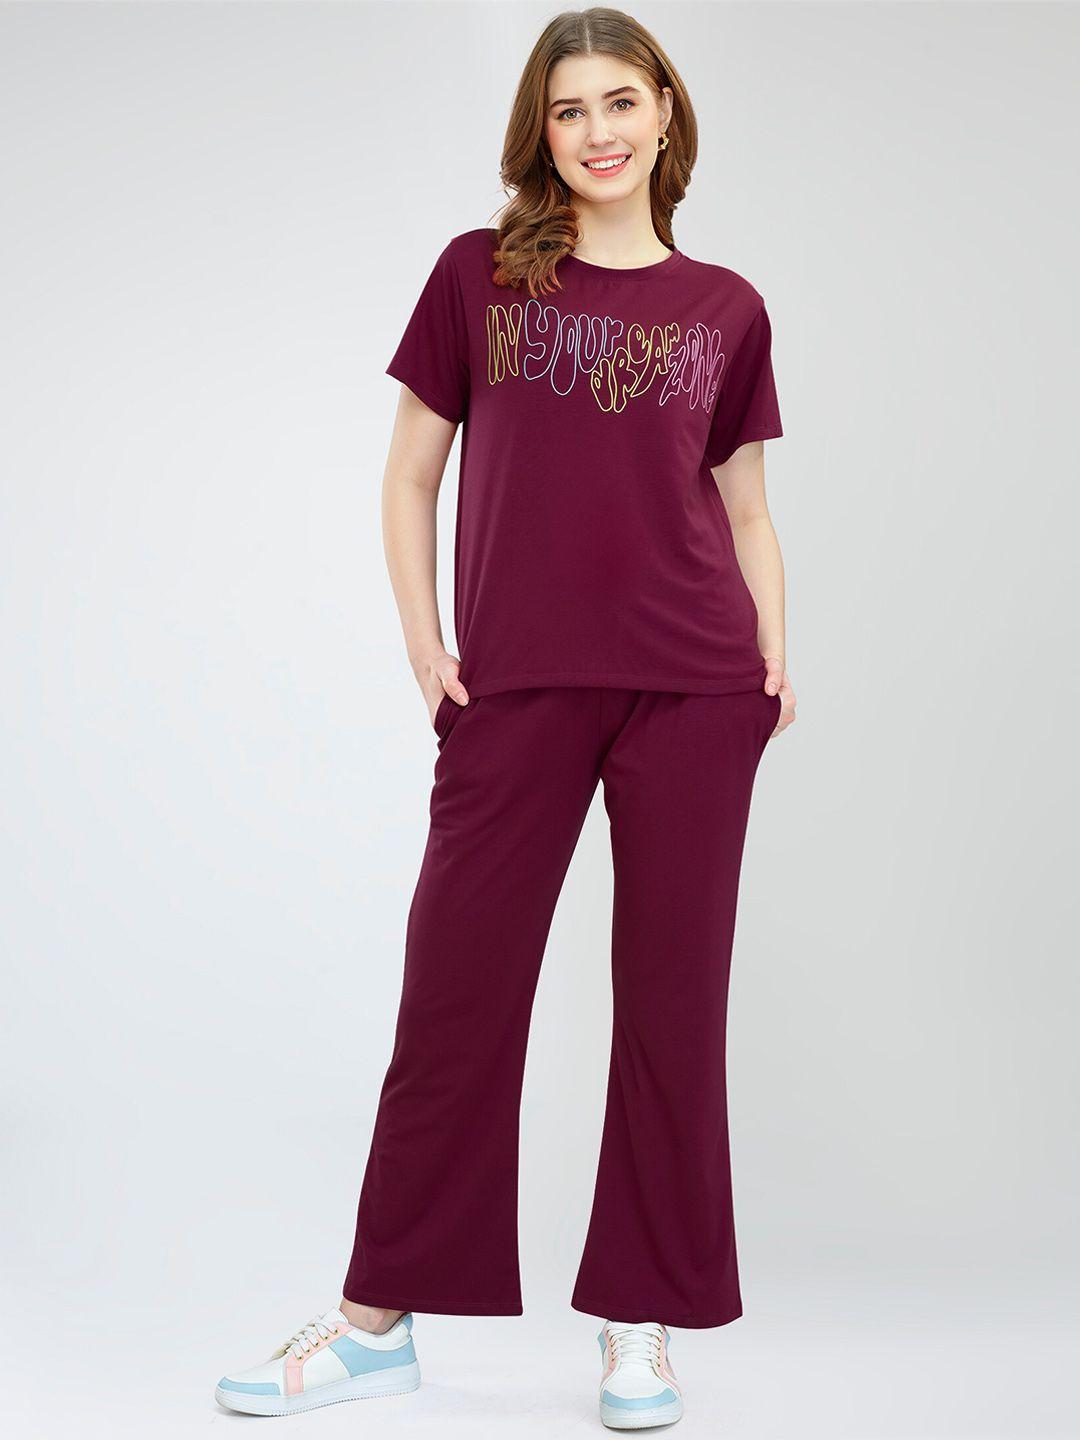 zeyo-printed-t-shirt-with-trousers-co-ords